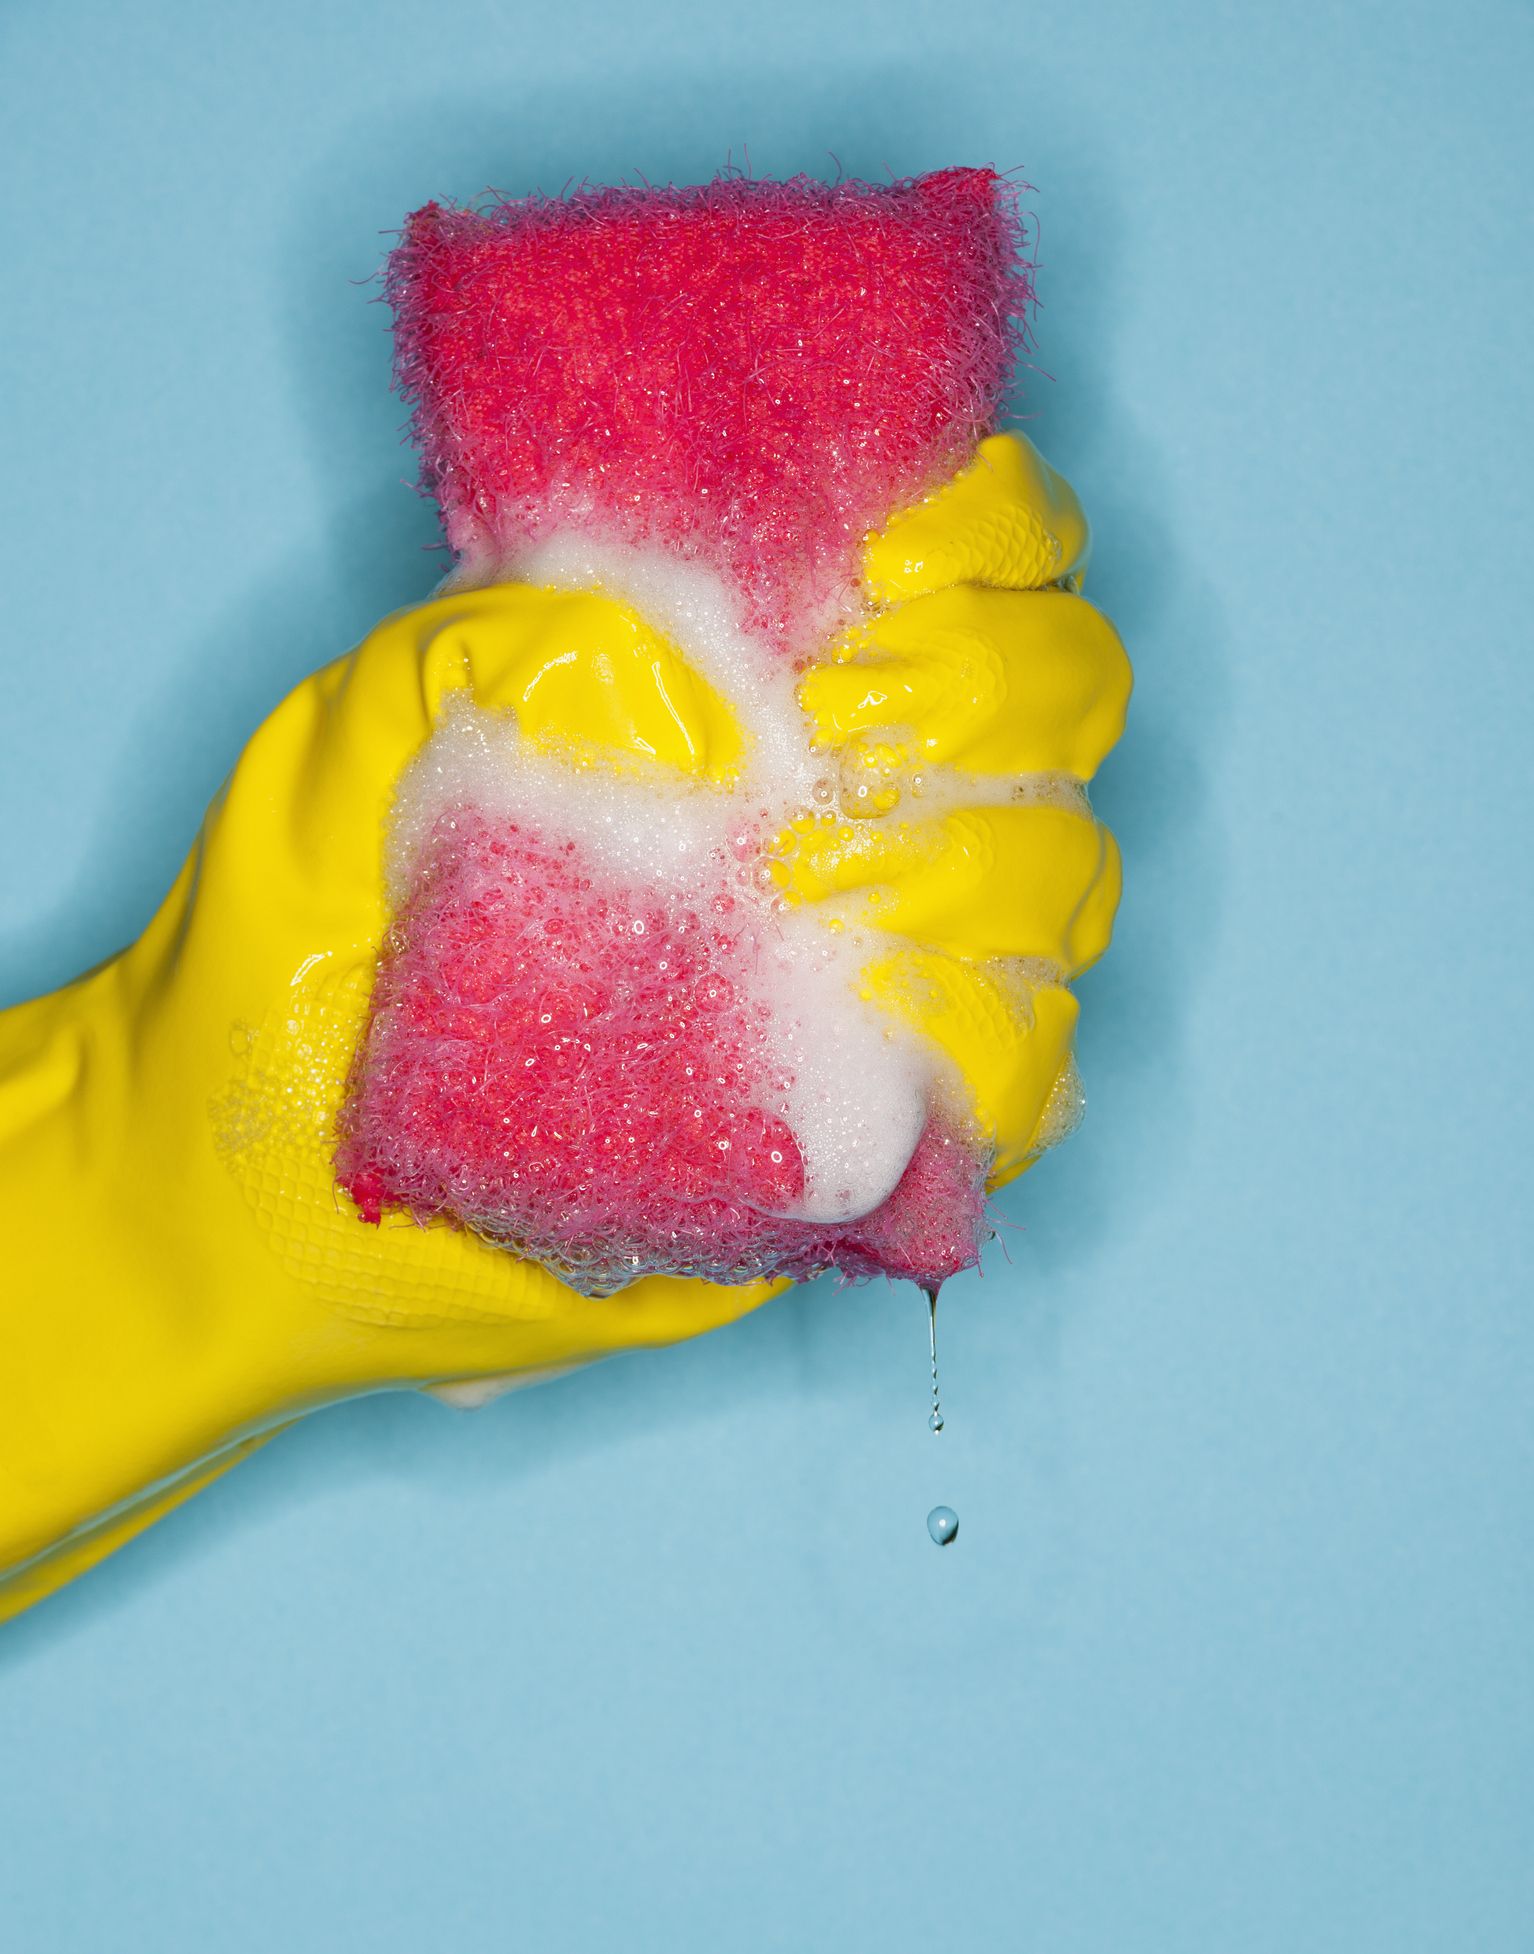 How to Sanitize Sponges and Scrub Brushes With Vinegar